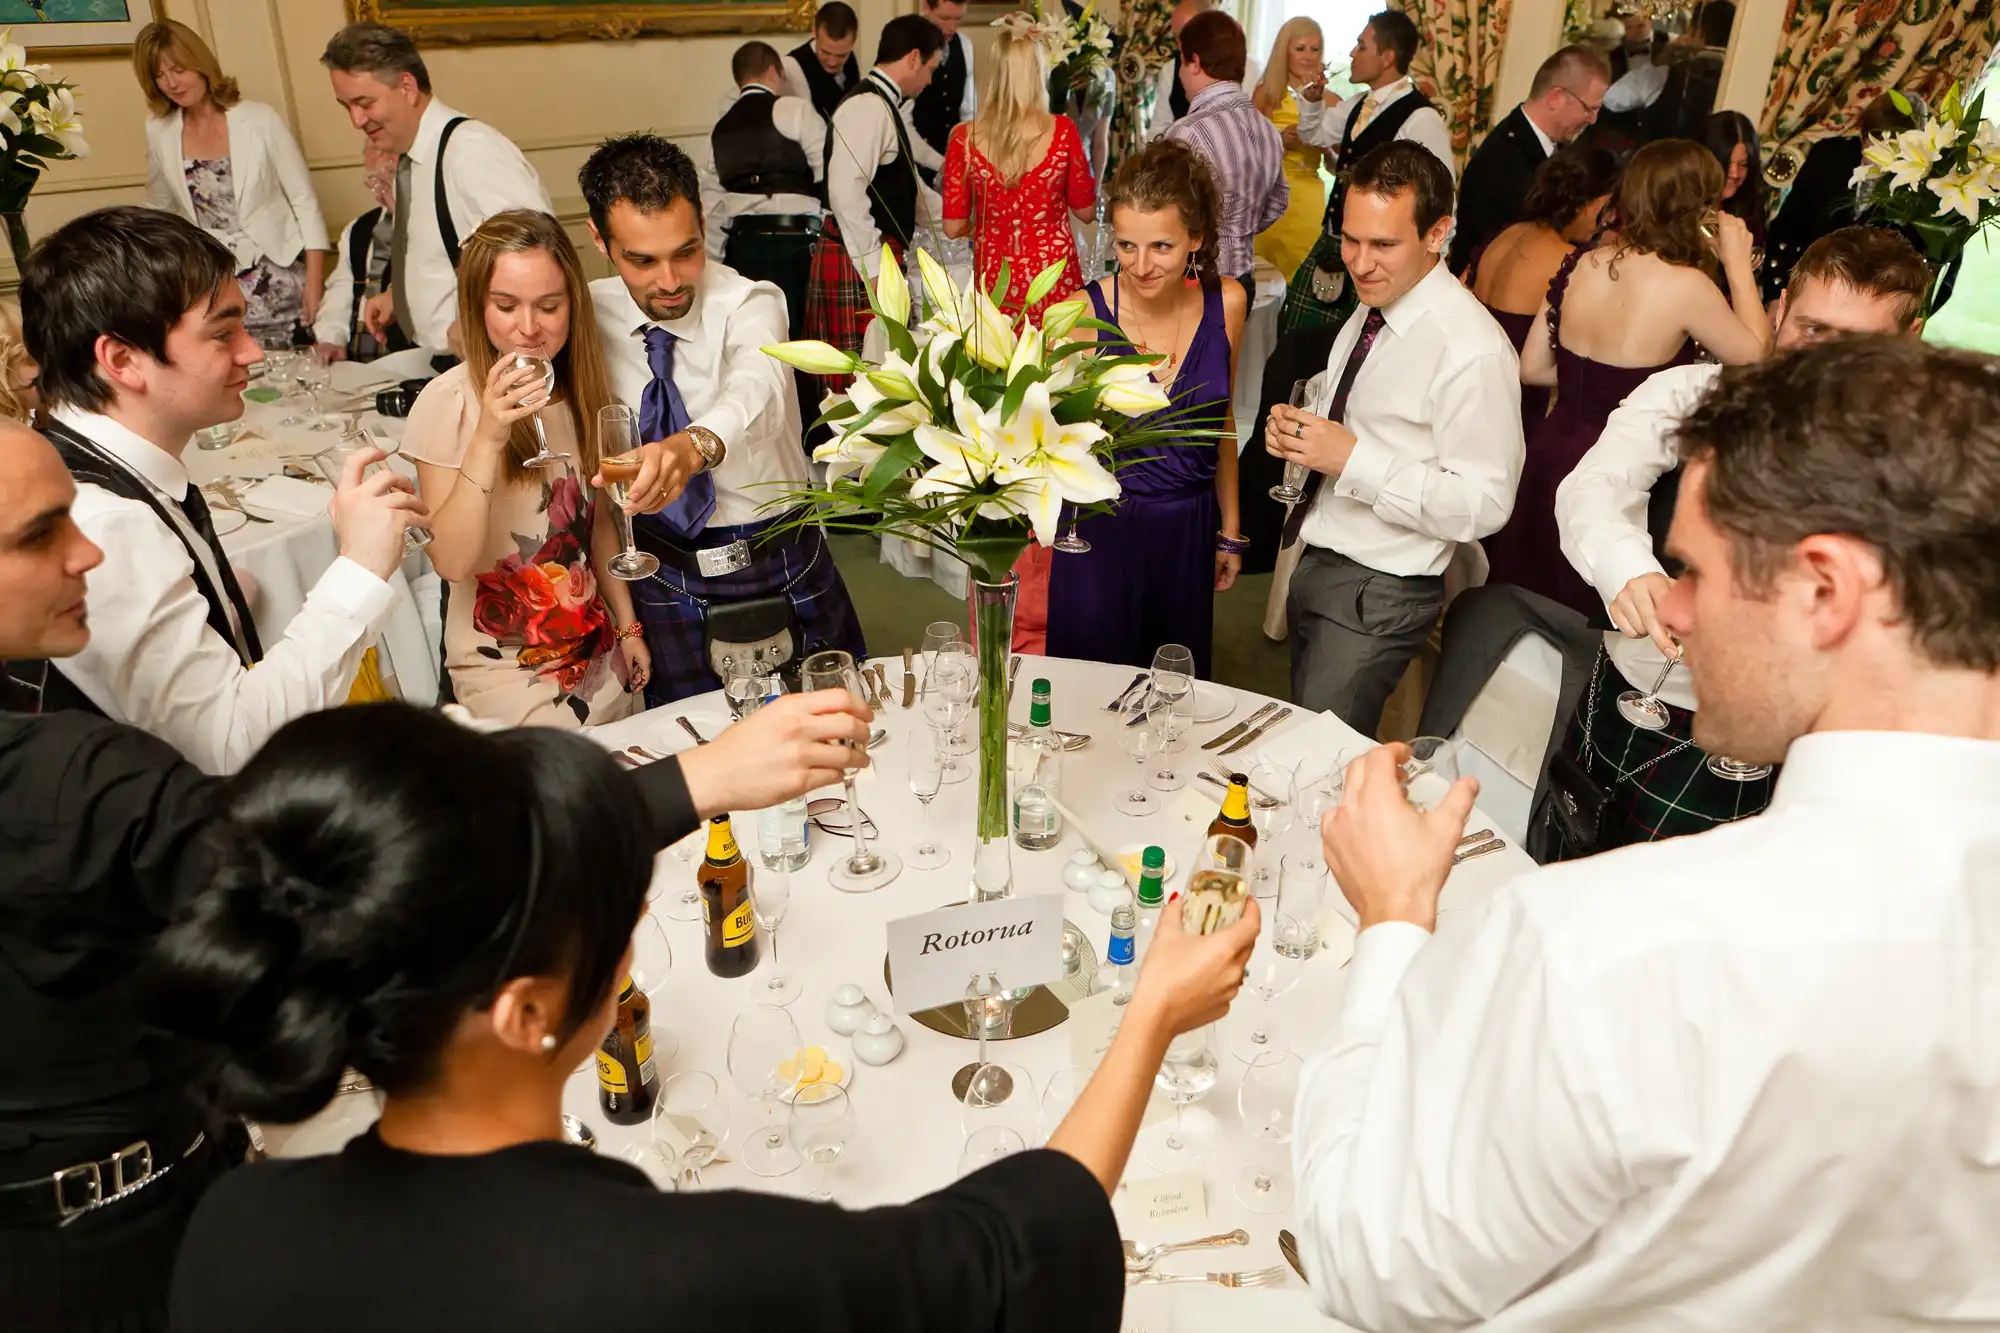 Group of people engaging in conversation and toasting drinks at a festive table with floral centerpieces in an elegant room.